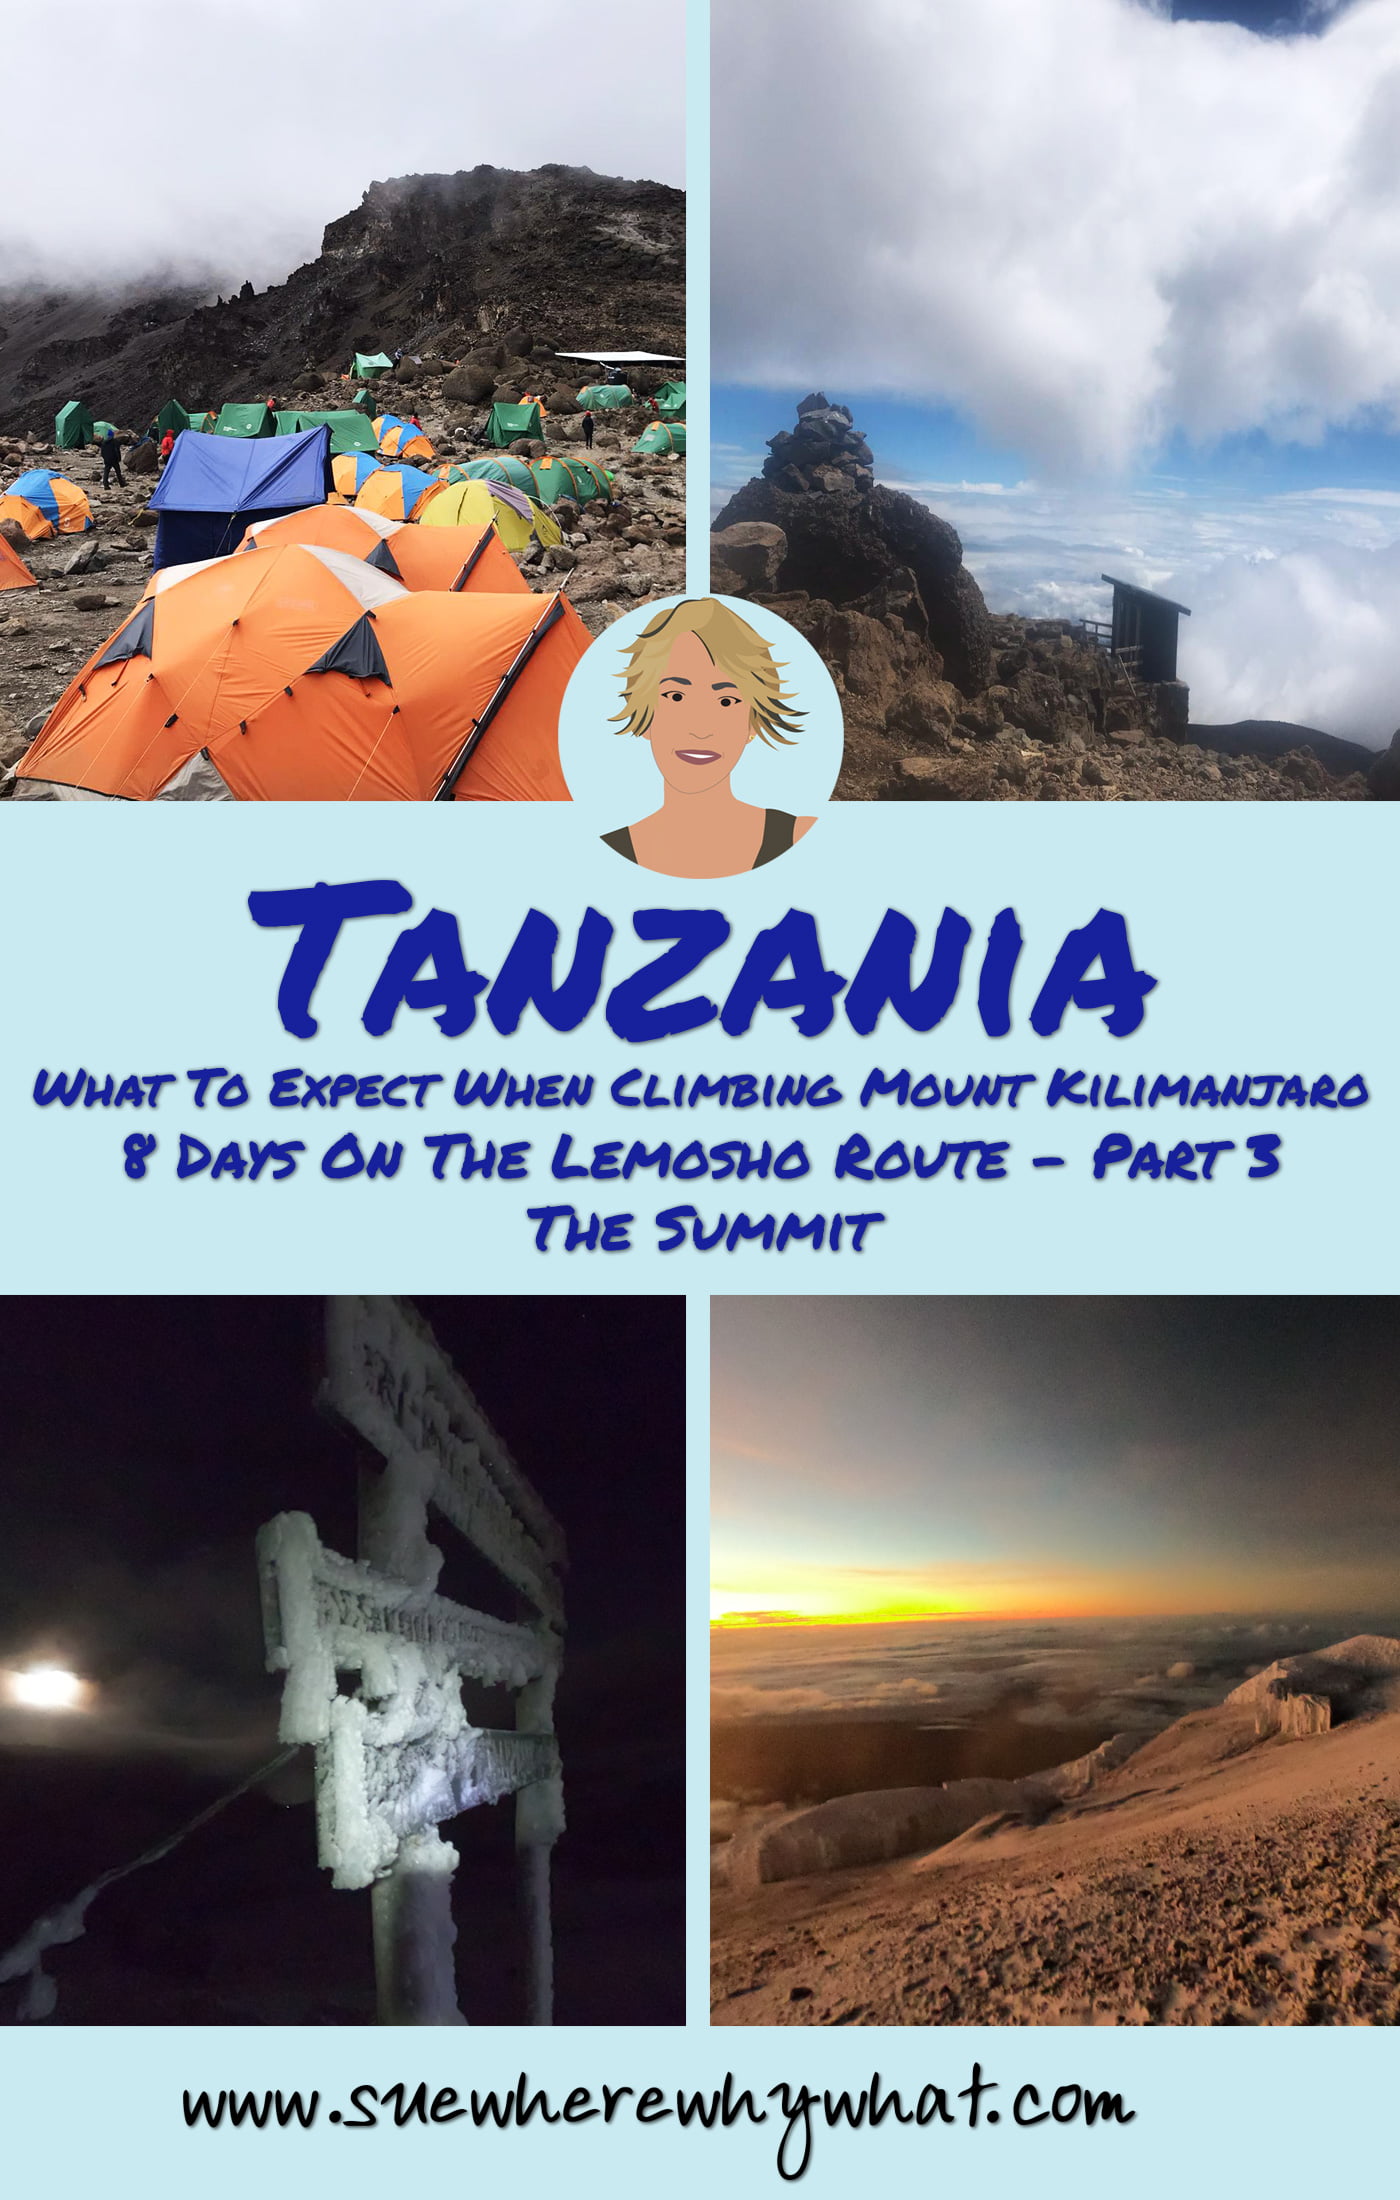 What To Expect When Climbing Mount Kilimanjaro. 8 Days on the Lemosho Route - Part 3 The Summit